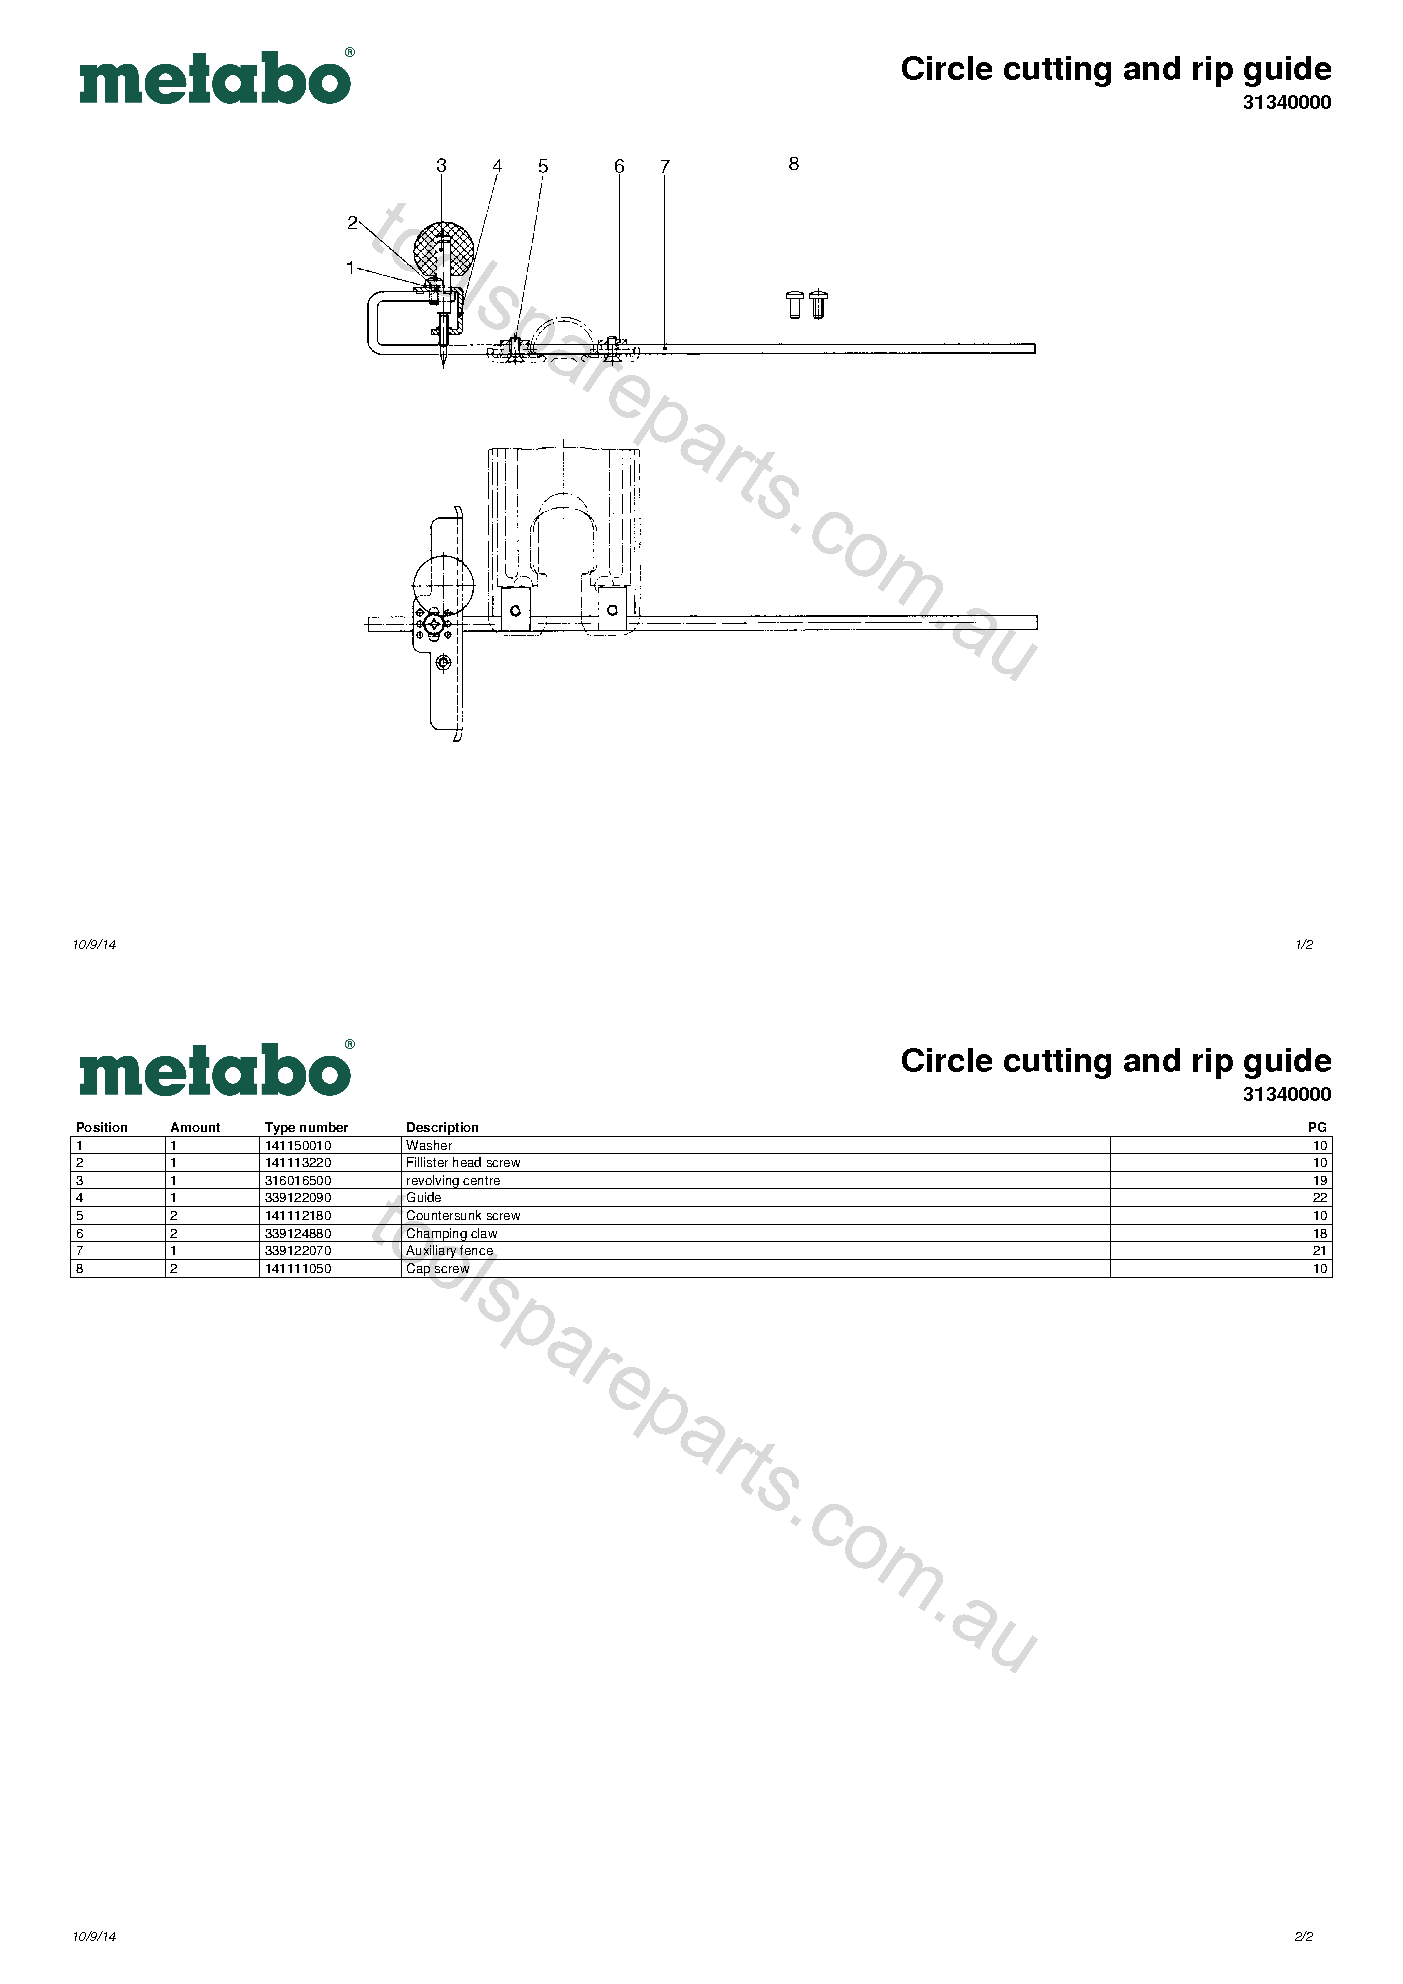 Metabo Circle cutting and rip guide 31340000  Diagram 1